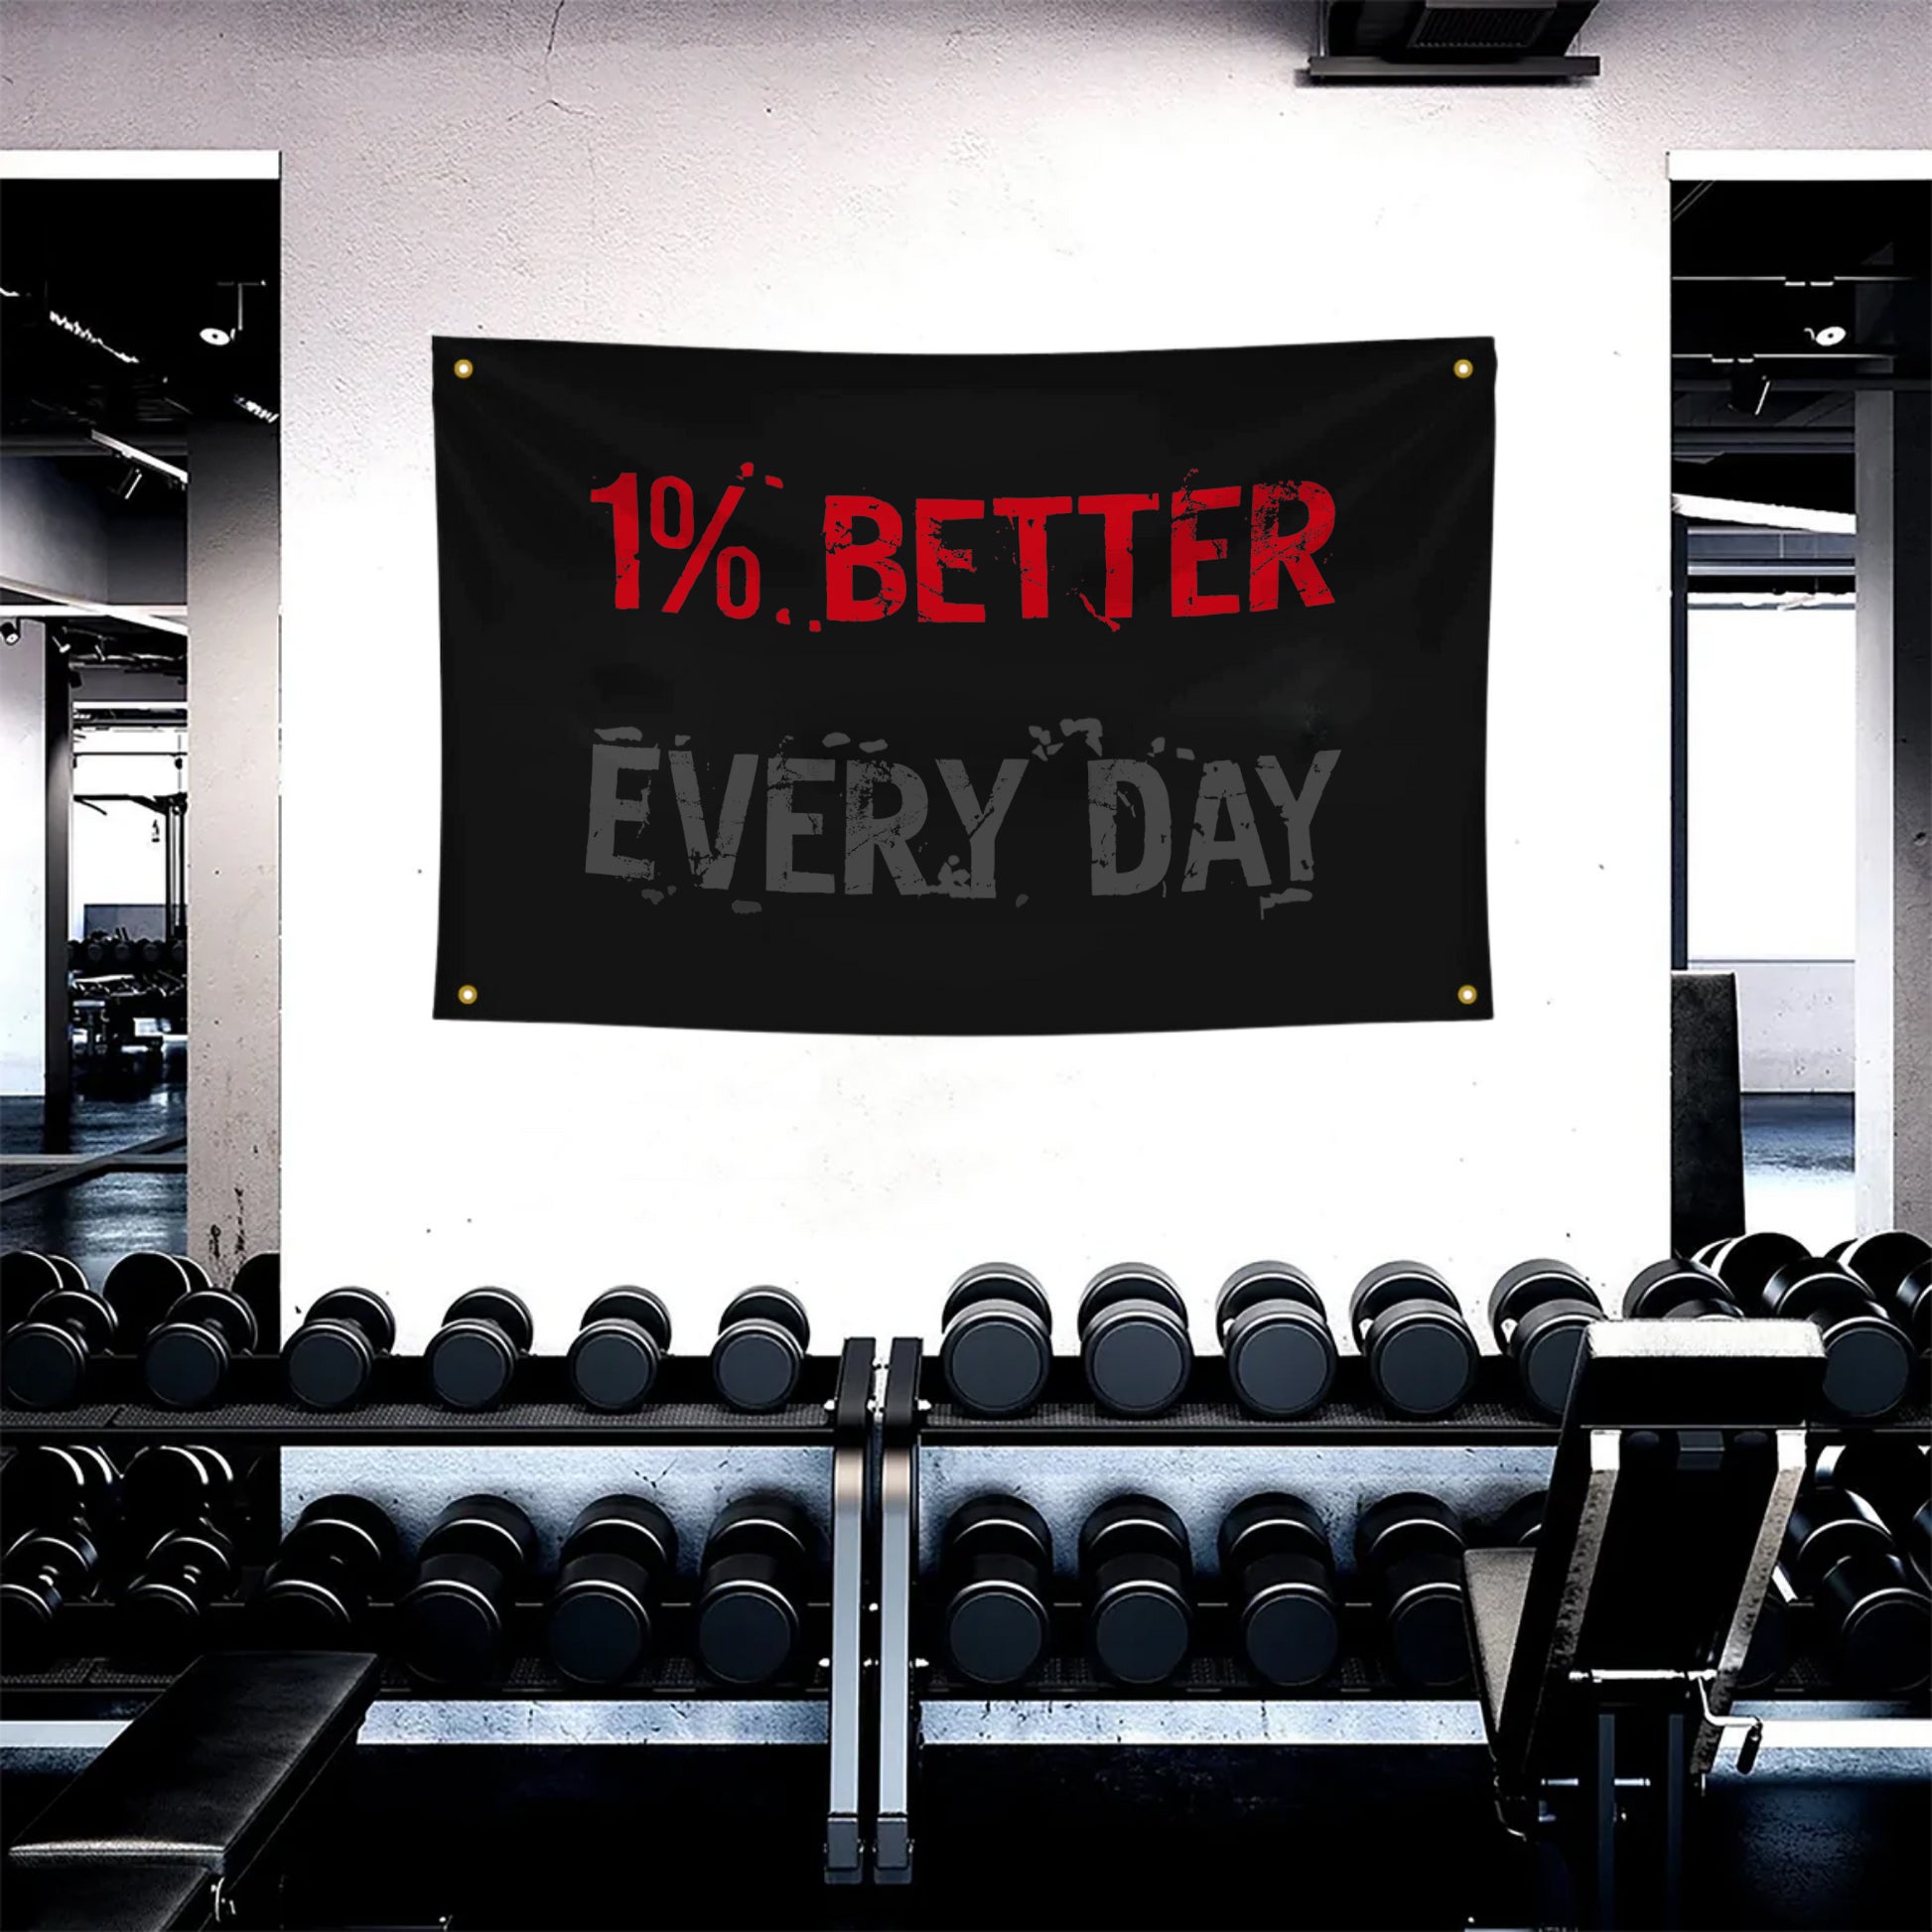 1% Better Every Day Print Flags